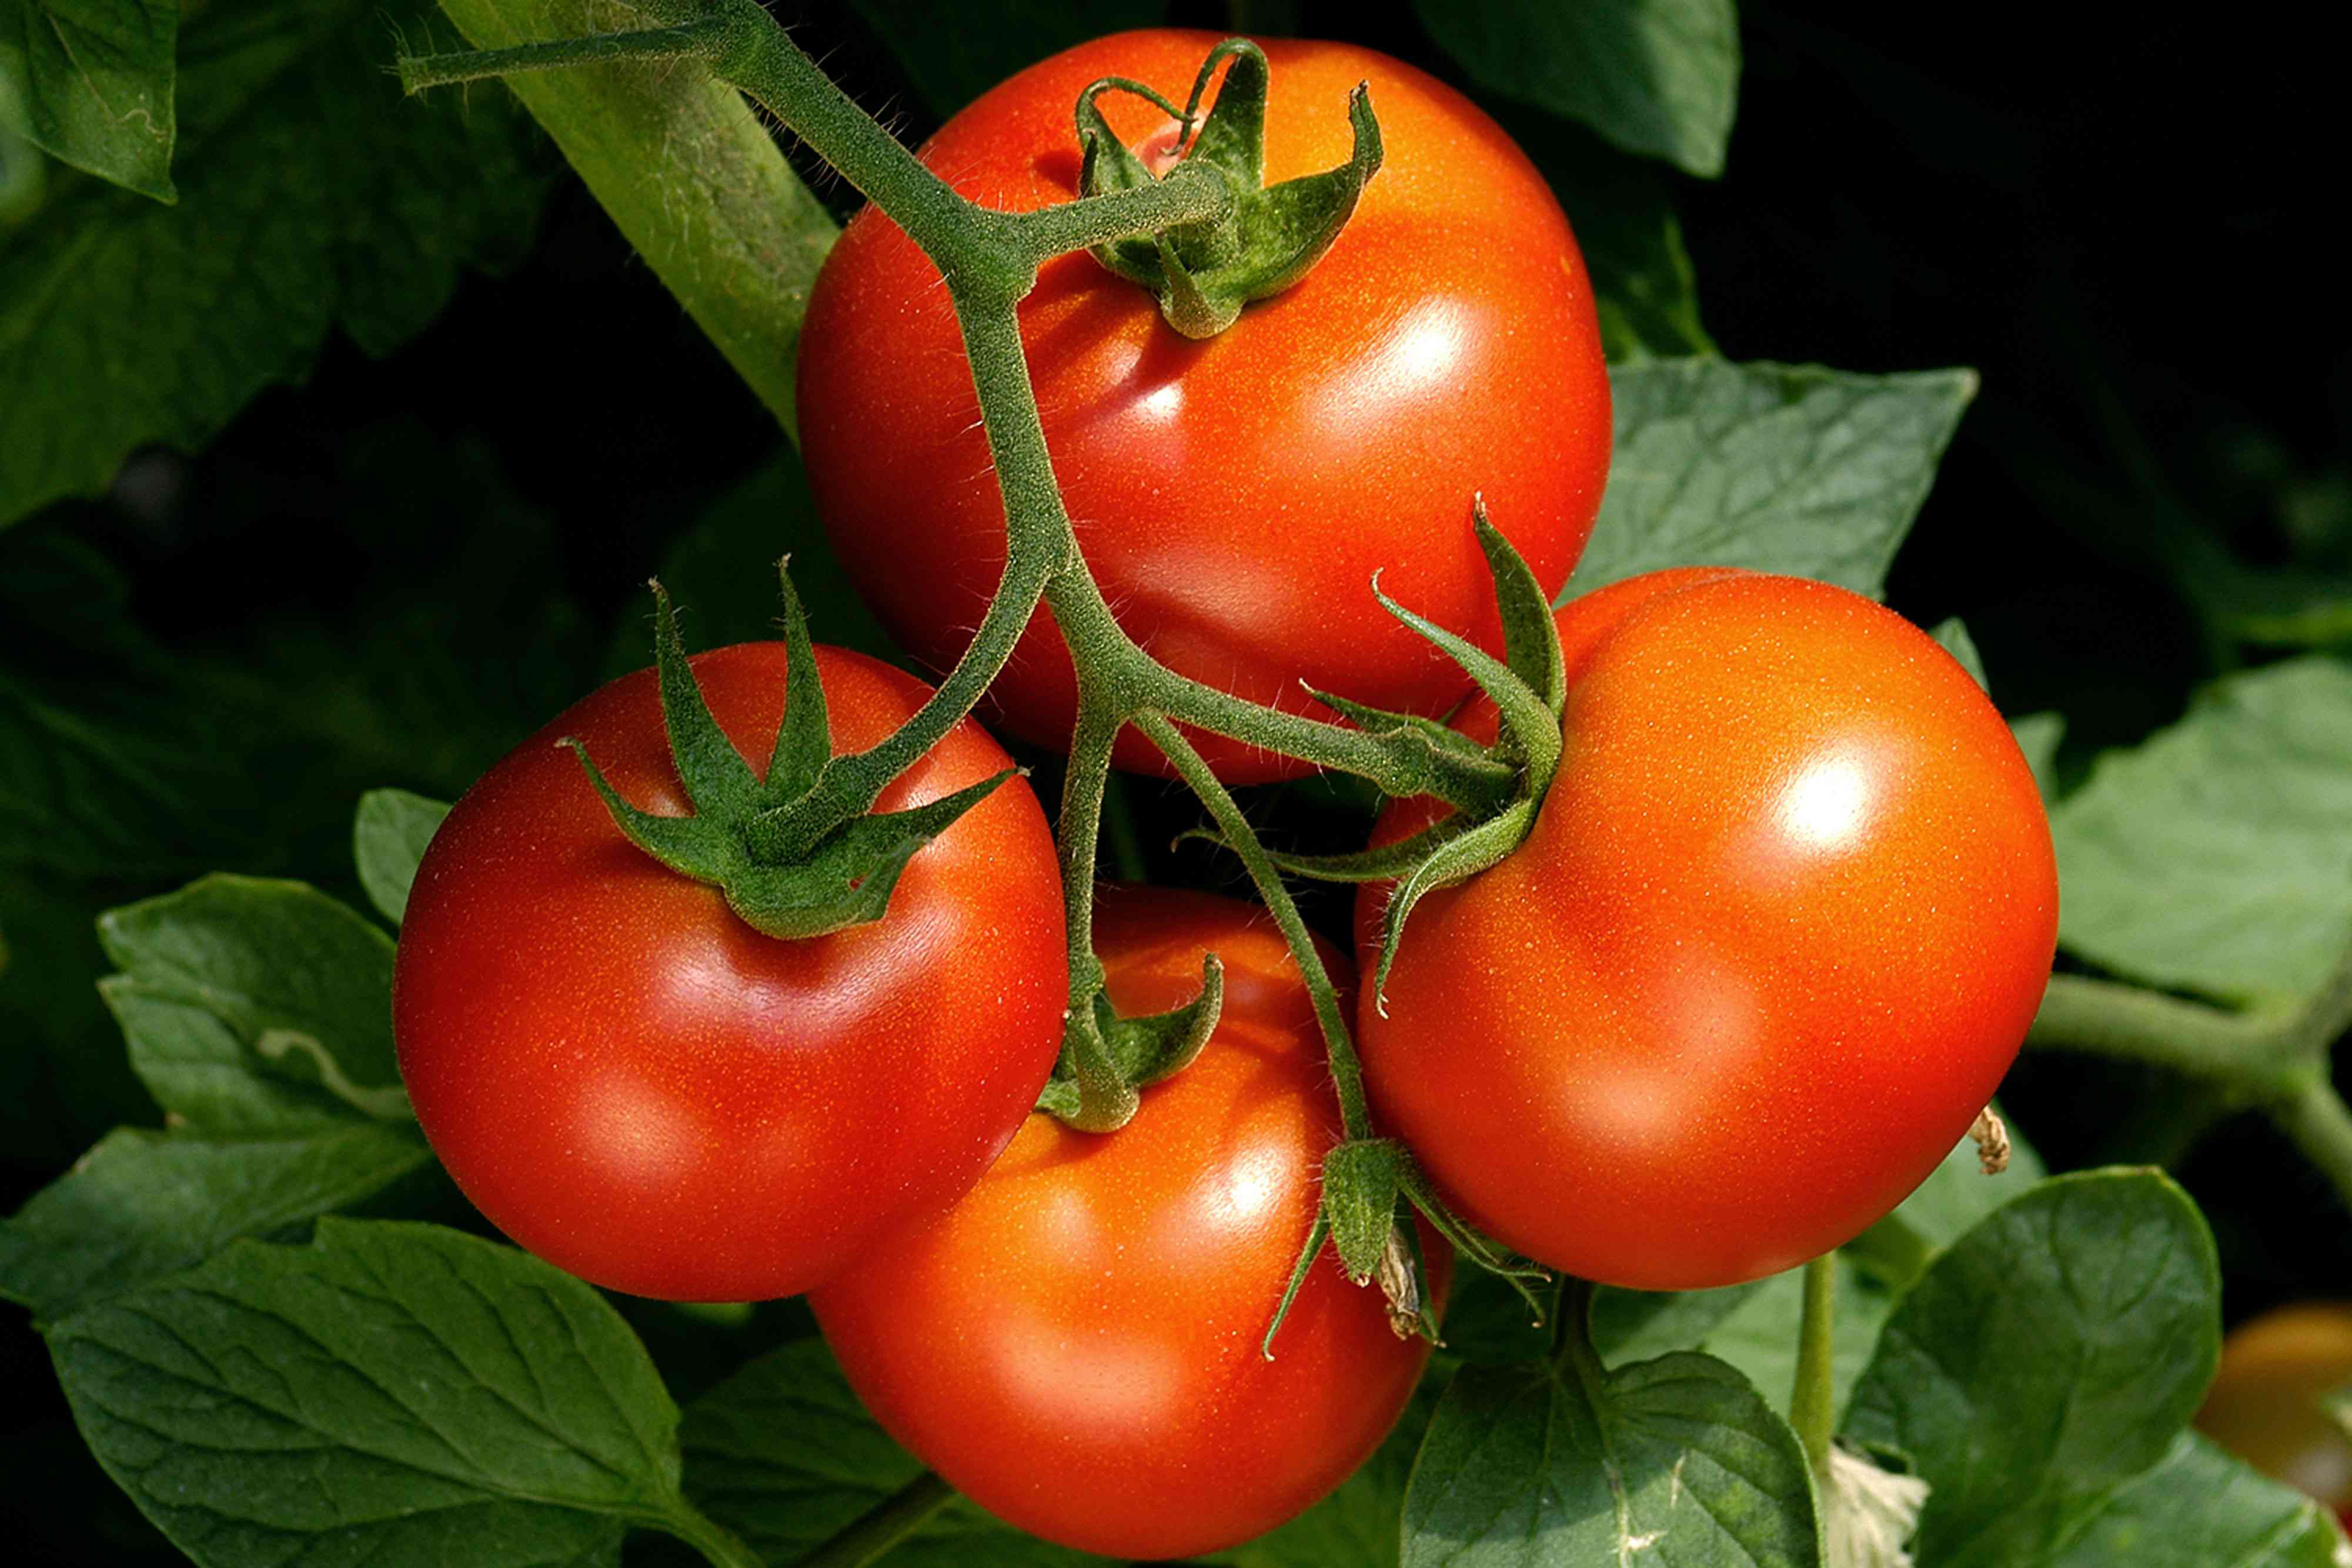 How to Prevent Blossom-End Rot, a Common Tomato Plant Disease That Can't Be Reversed